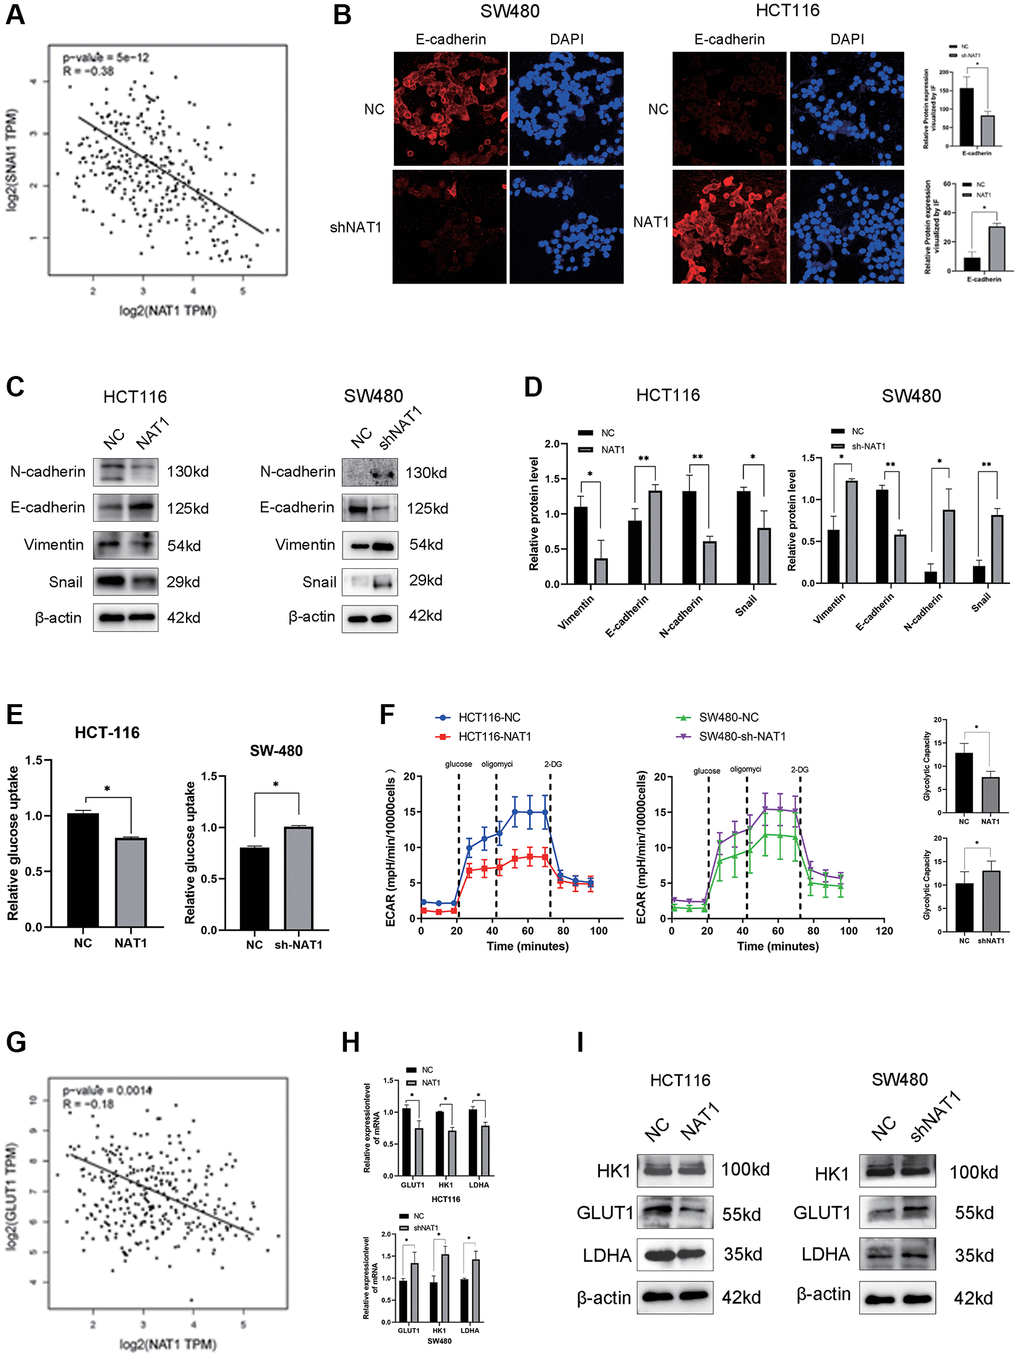 Overexpression of NAT1 inhibits EMT and glycolysis in colorectal cancer cells. (A) Snail expression in TCGA database was negatively correlated with NAT1; (B) Immunofluorescence results showed that overexpression of NAT1 could promote the expression of E-cadherin (P C, D) Overexpression of NAT1 significantly inhibited the expression of EMT-related proteins (N-cadherin, Snail and Vimentin), and promoted the expression of E-cadherin (P E) Overexpression of NAT1 significantly inhibited the glucose uptake ability of colorectal cancer cells; (F) ECAR assay showed that NAT1 significantly inhibited the glycolysis and storage capacity of colorectal cancer; (G) GLUT1 was negatively correlated with NAT1 expression in TCGA database. (H, I) Overexpression of NAT1 inhibited the expression of glycolytic related metabolic enzymes (GLUT1, LDHA).